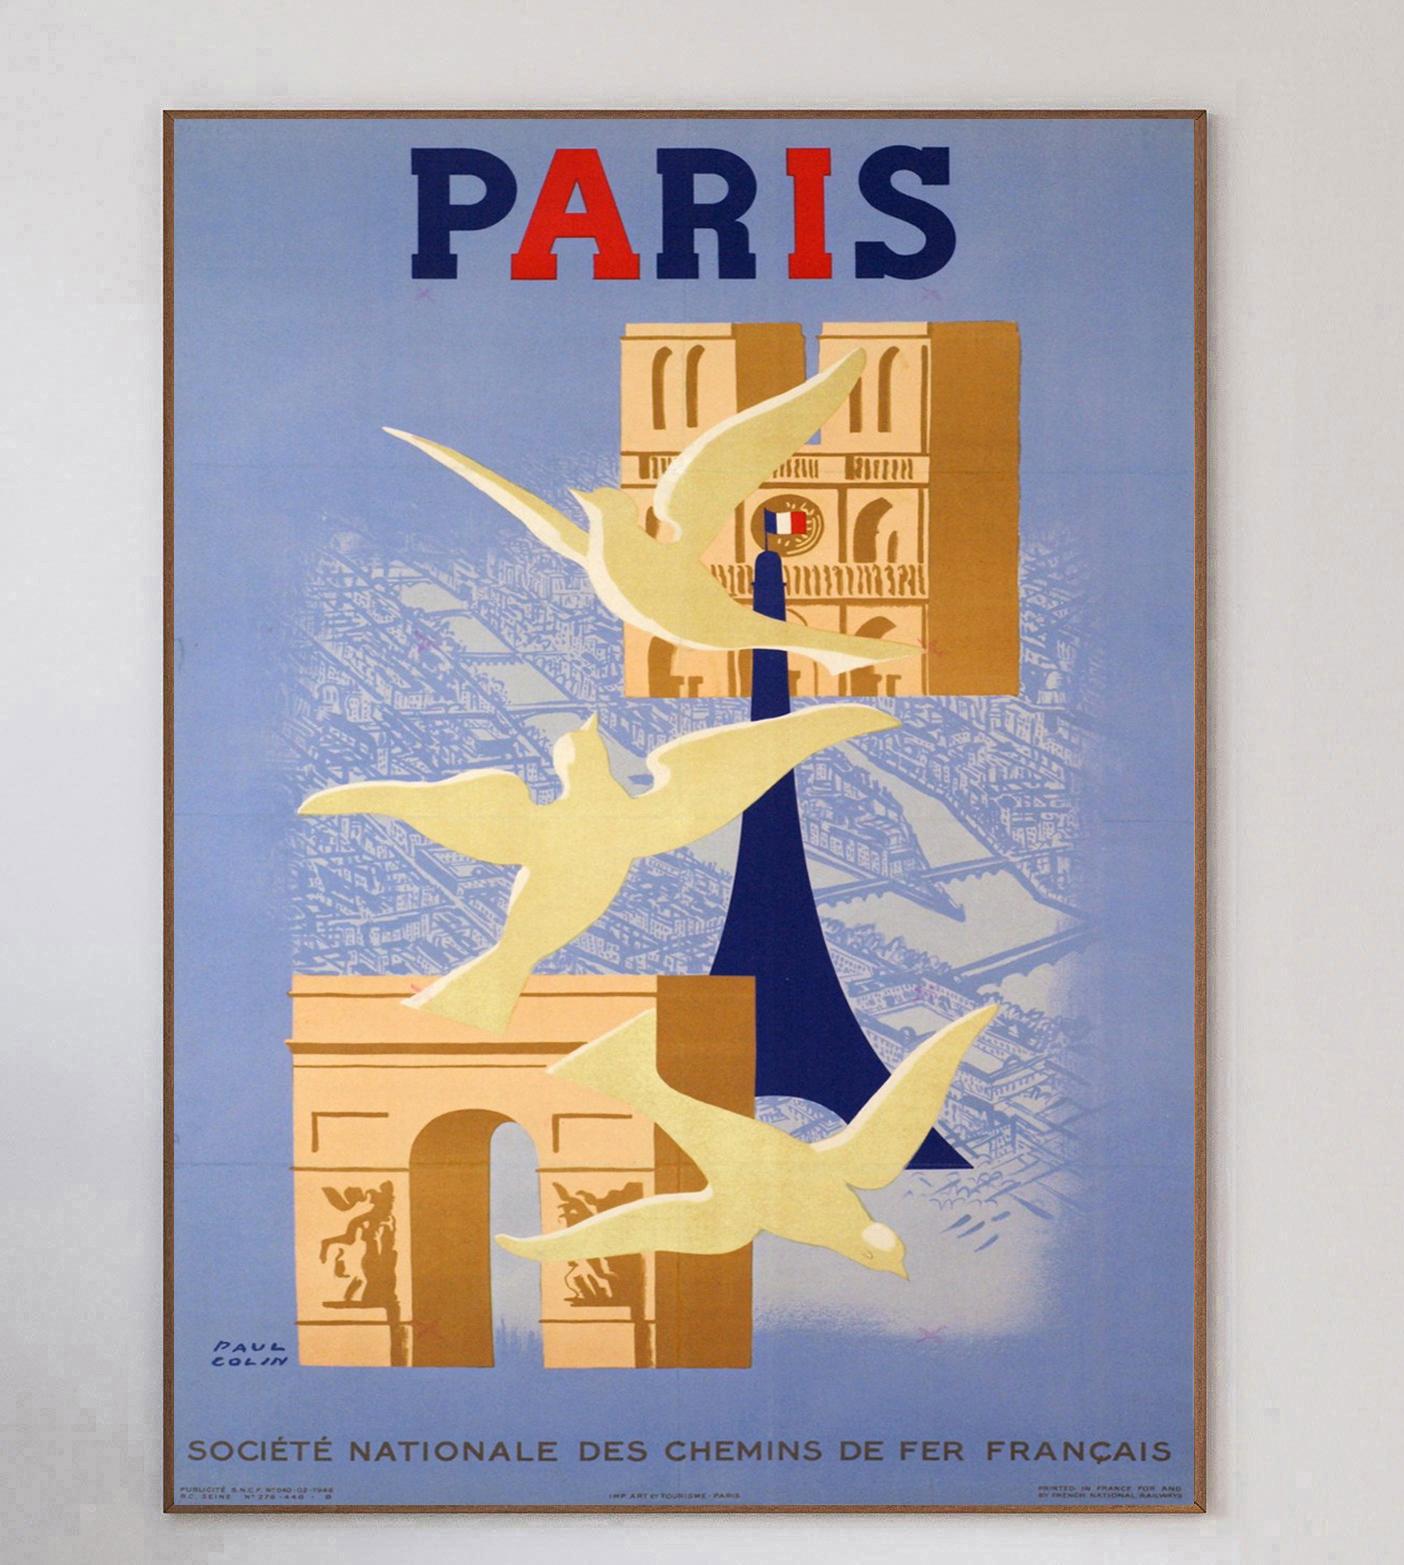 This gorgeous & rare poster for SNCF features artwork from the great commercial artist Paul Colin. The iconic French illustrator created advertisements for the likes of Moulin Rouge, the Champs-Elysees Theatre and brand such as Philips and